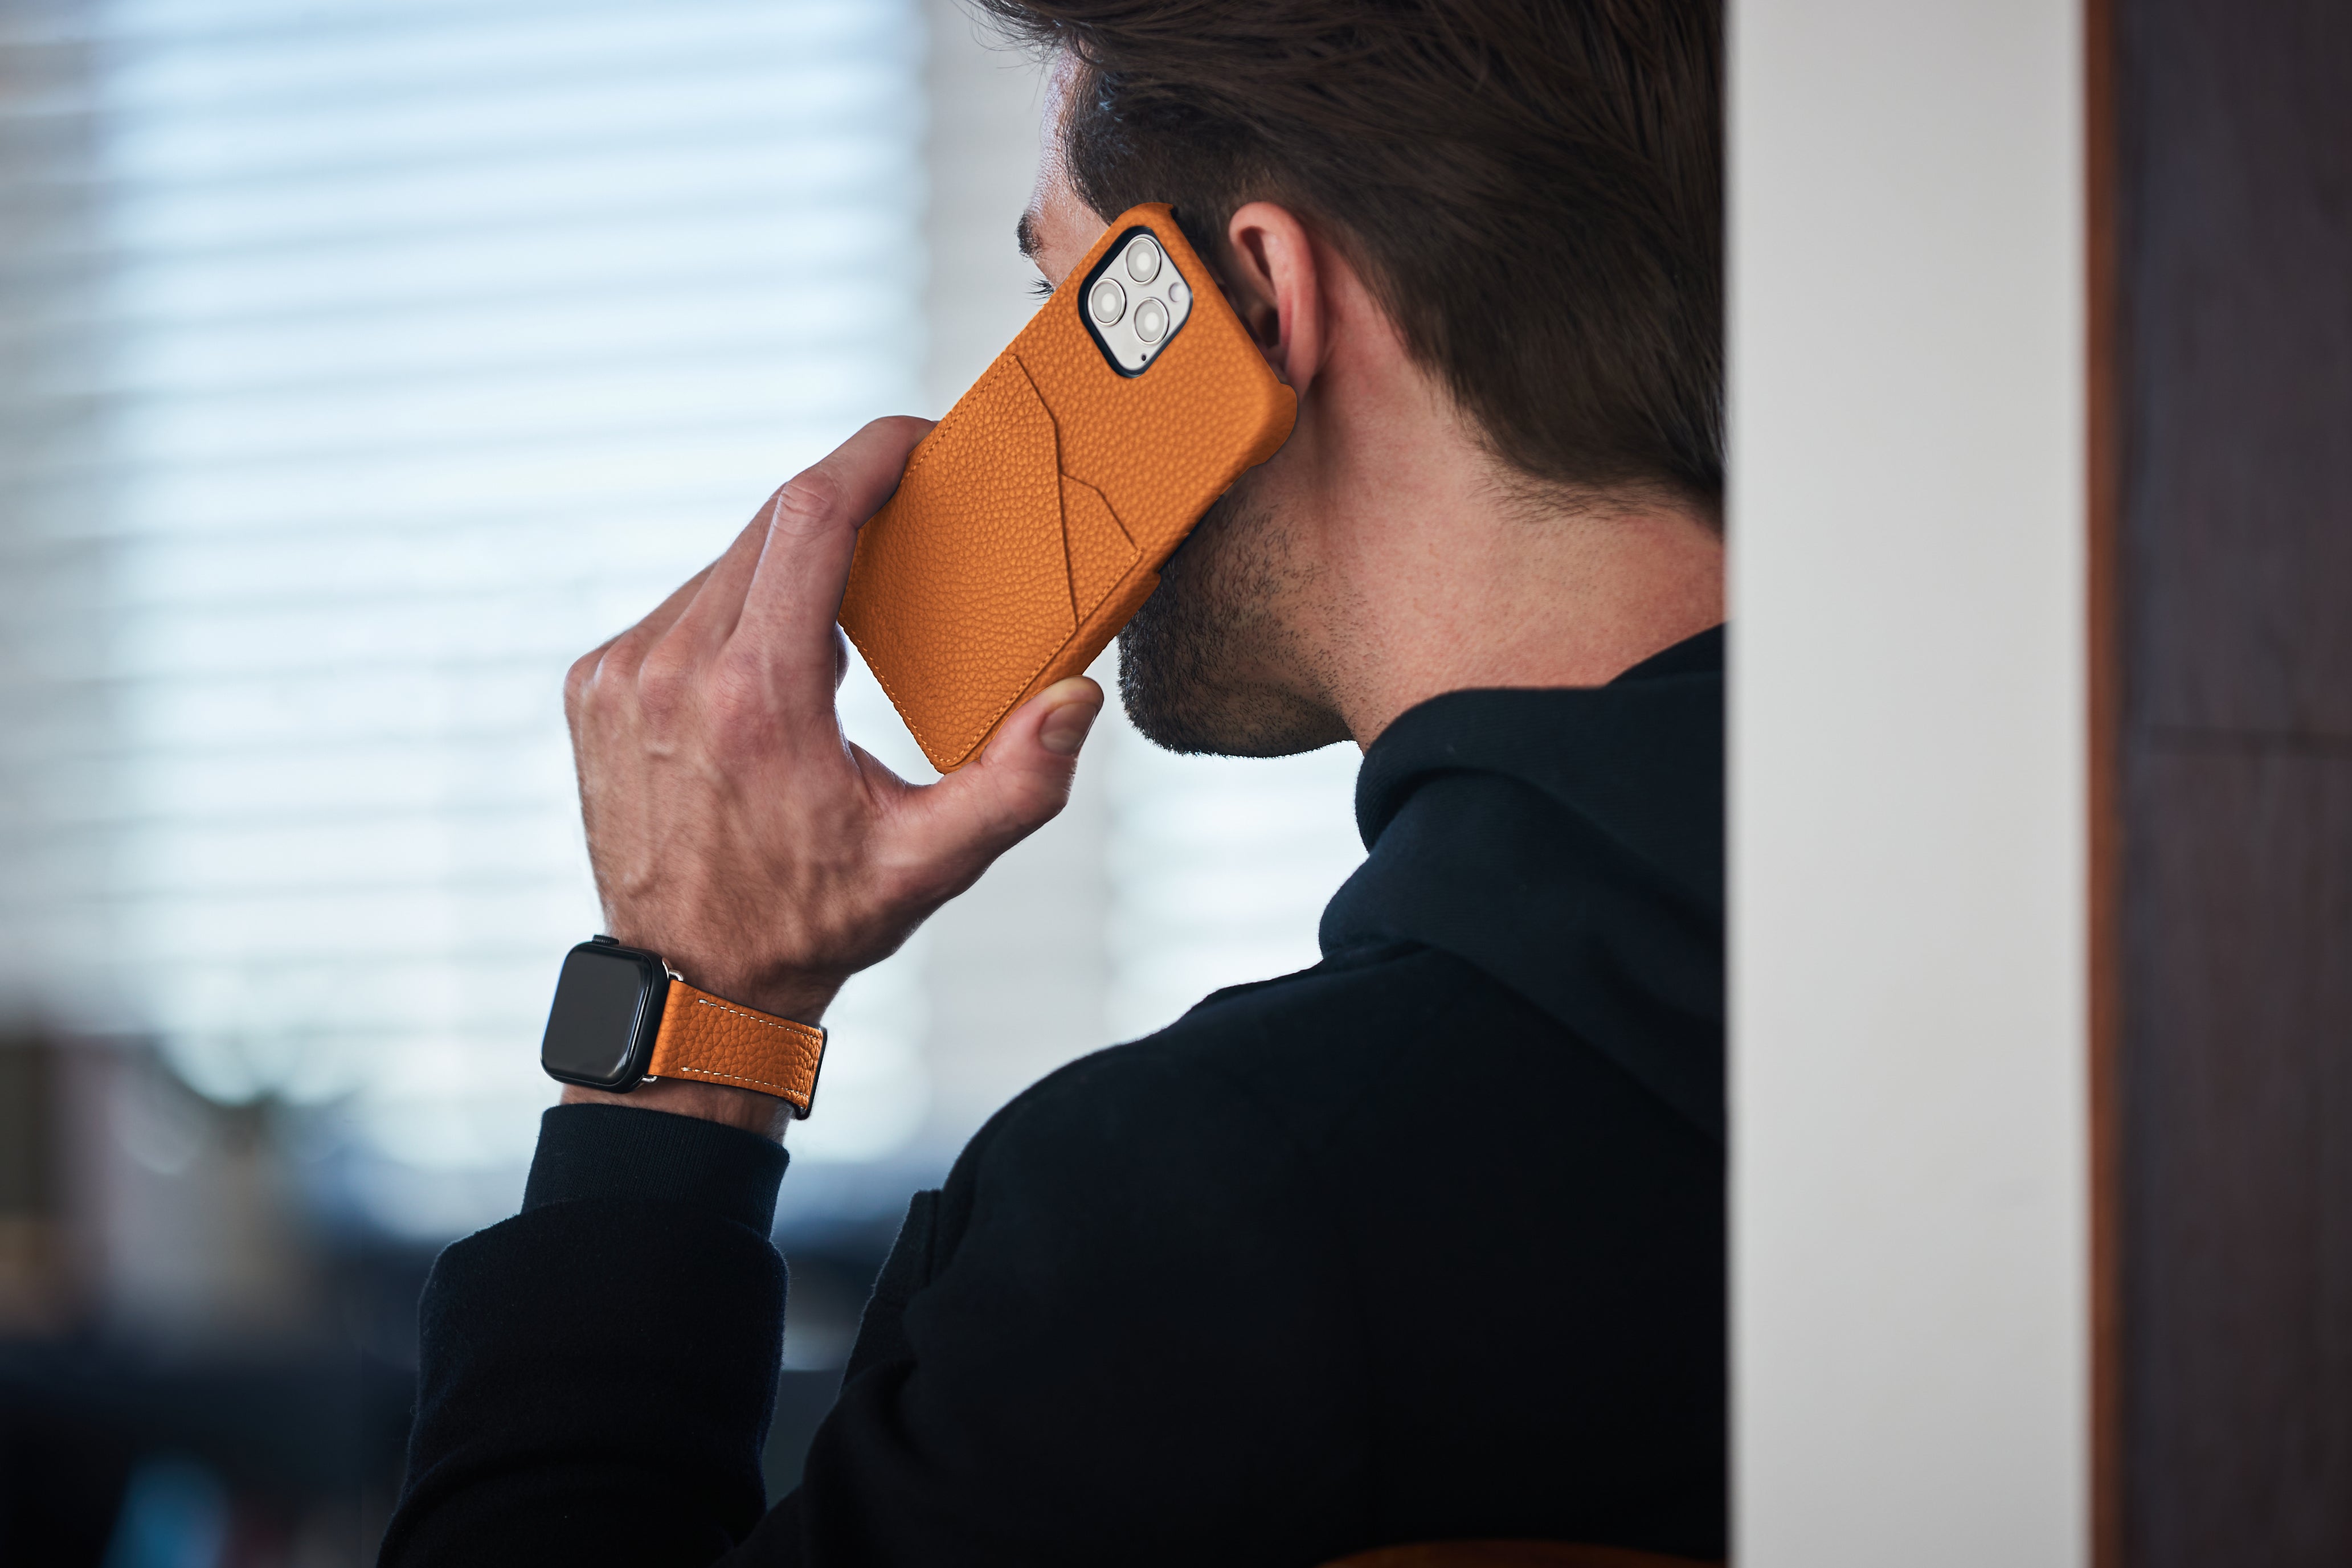 Modern and colorful iPhone case in the 2023 trend color orange.